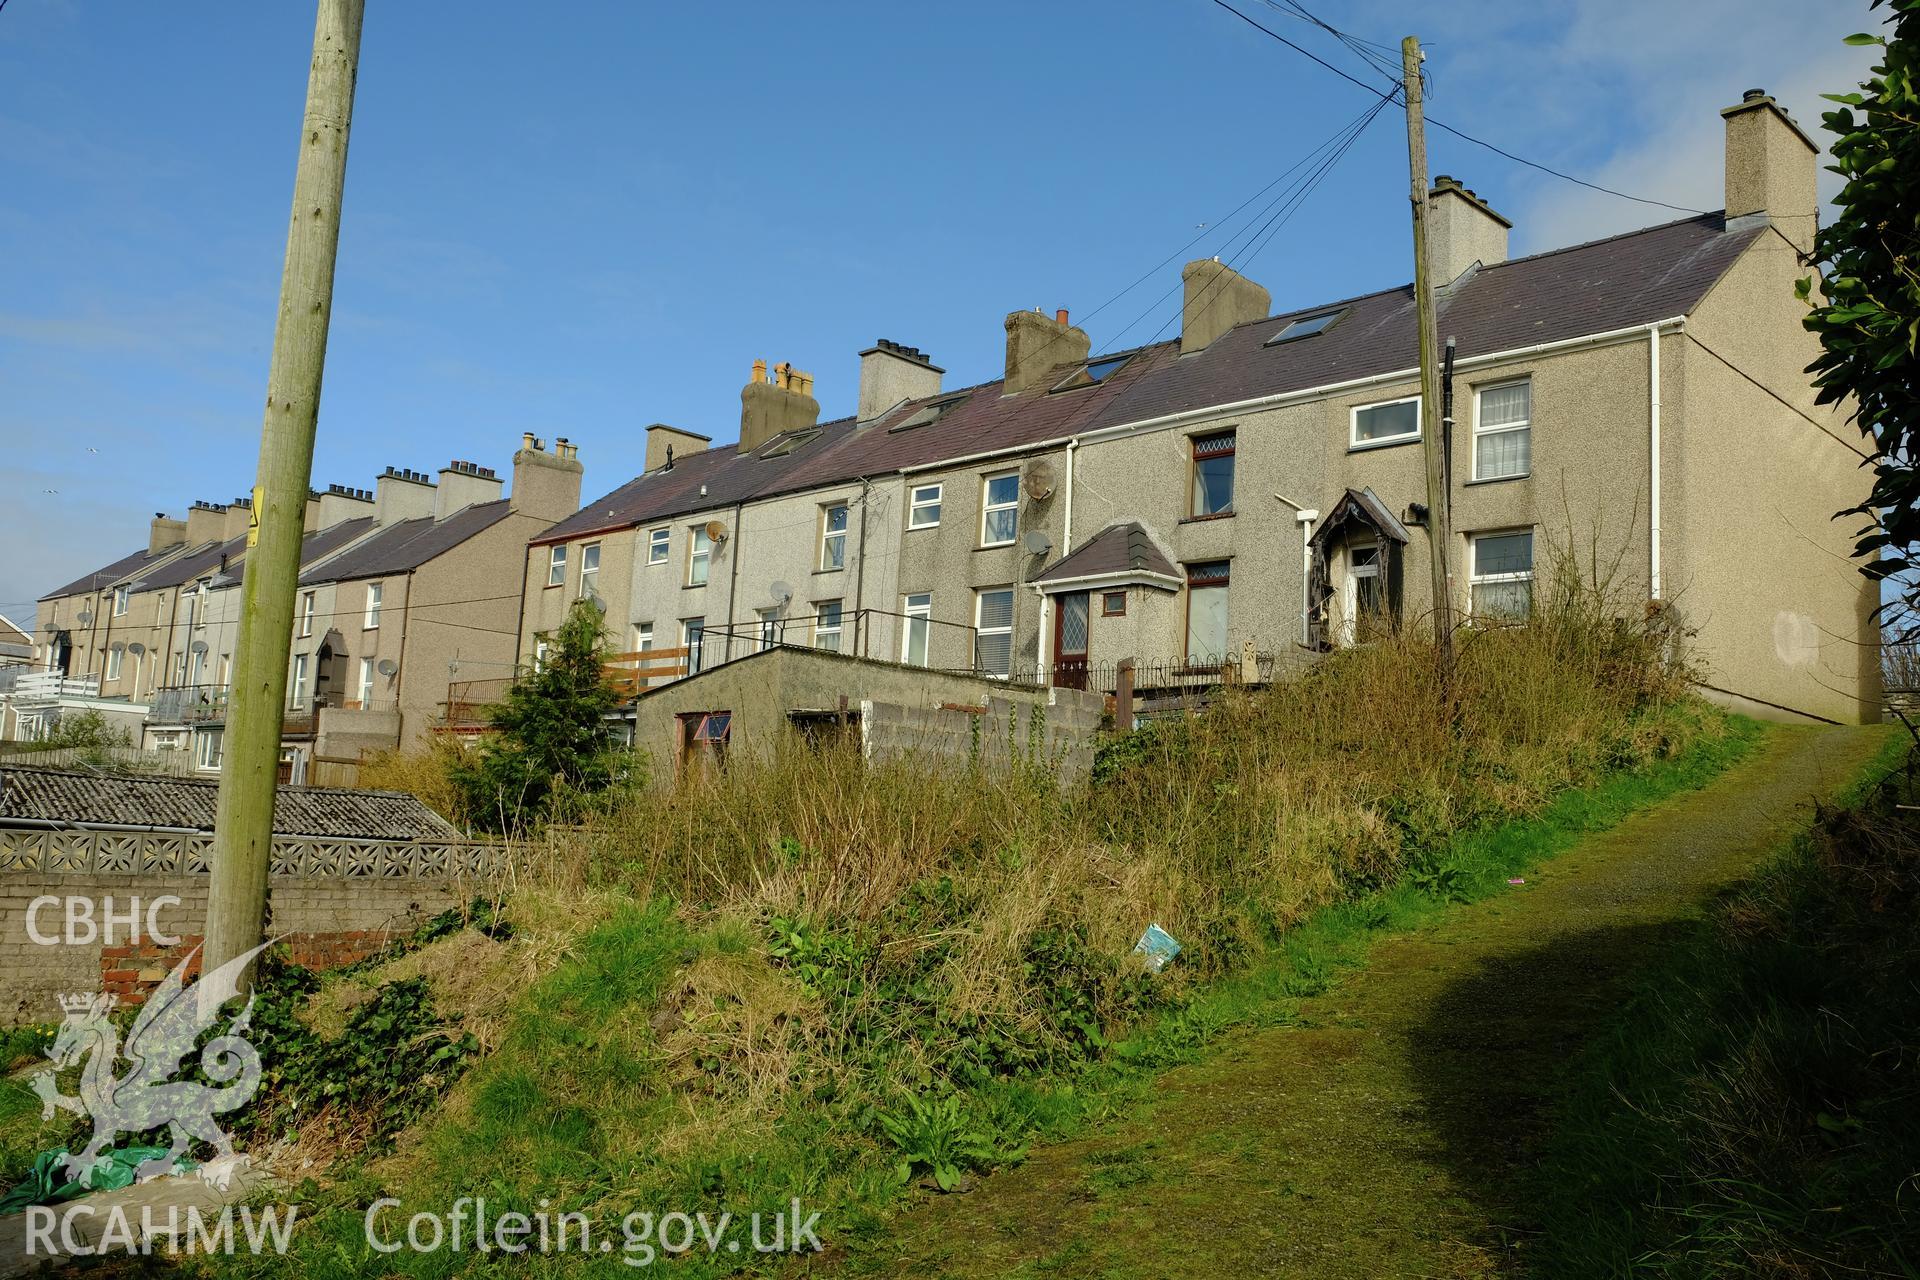 Colour photograph showing view looking north west of rear of houses on Coetmor Road, Bethesda, produced by Richard Hayman 16th March 2017